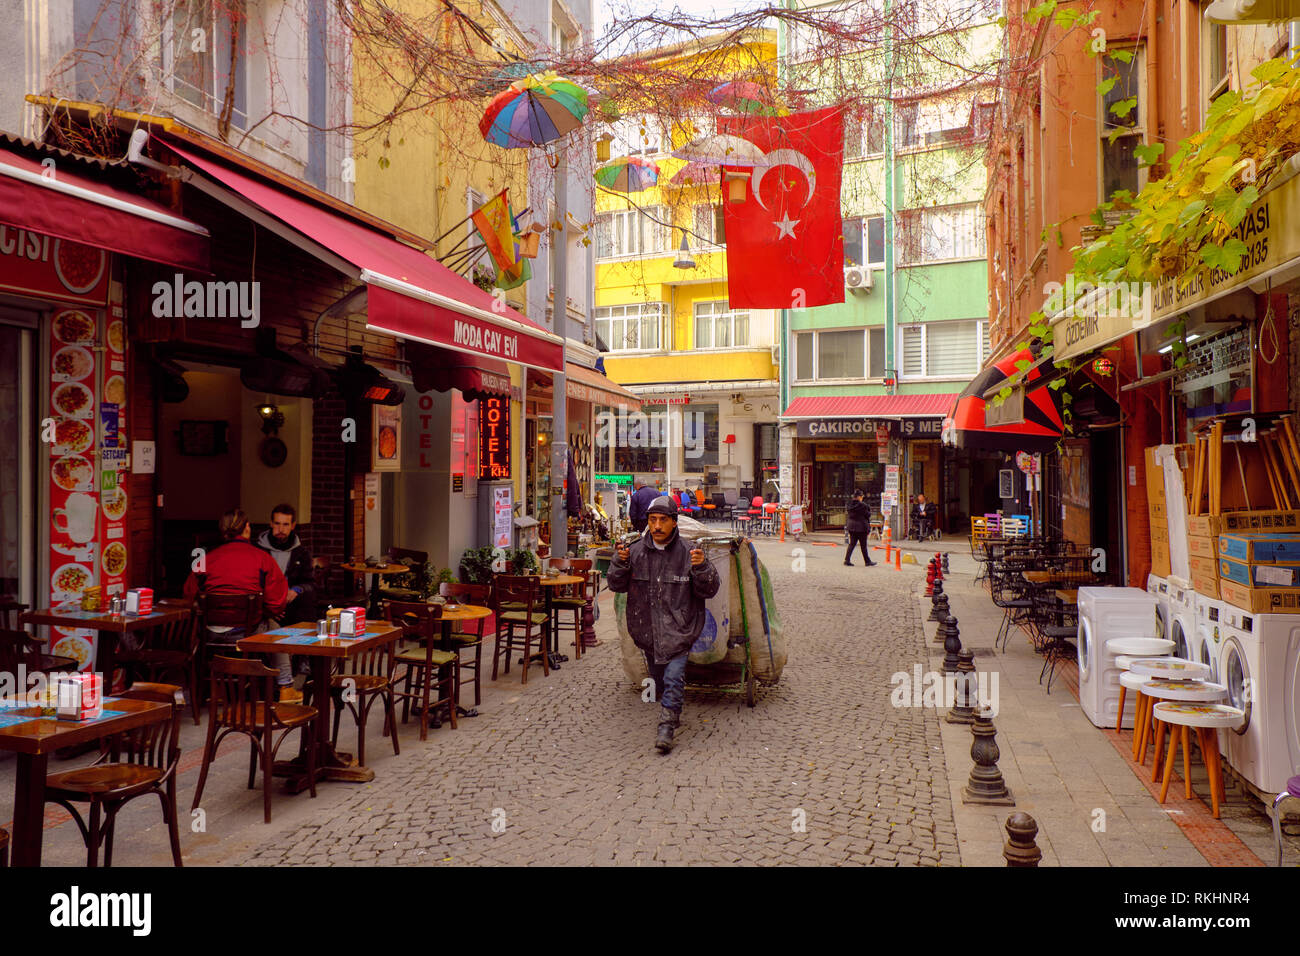 Local man recuperating goods  on a Pedestrian street lined with business in the core of Kadikoy, on the asian side of Istanbul, Turkey - December 2018 Stock Photo